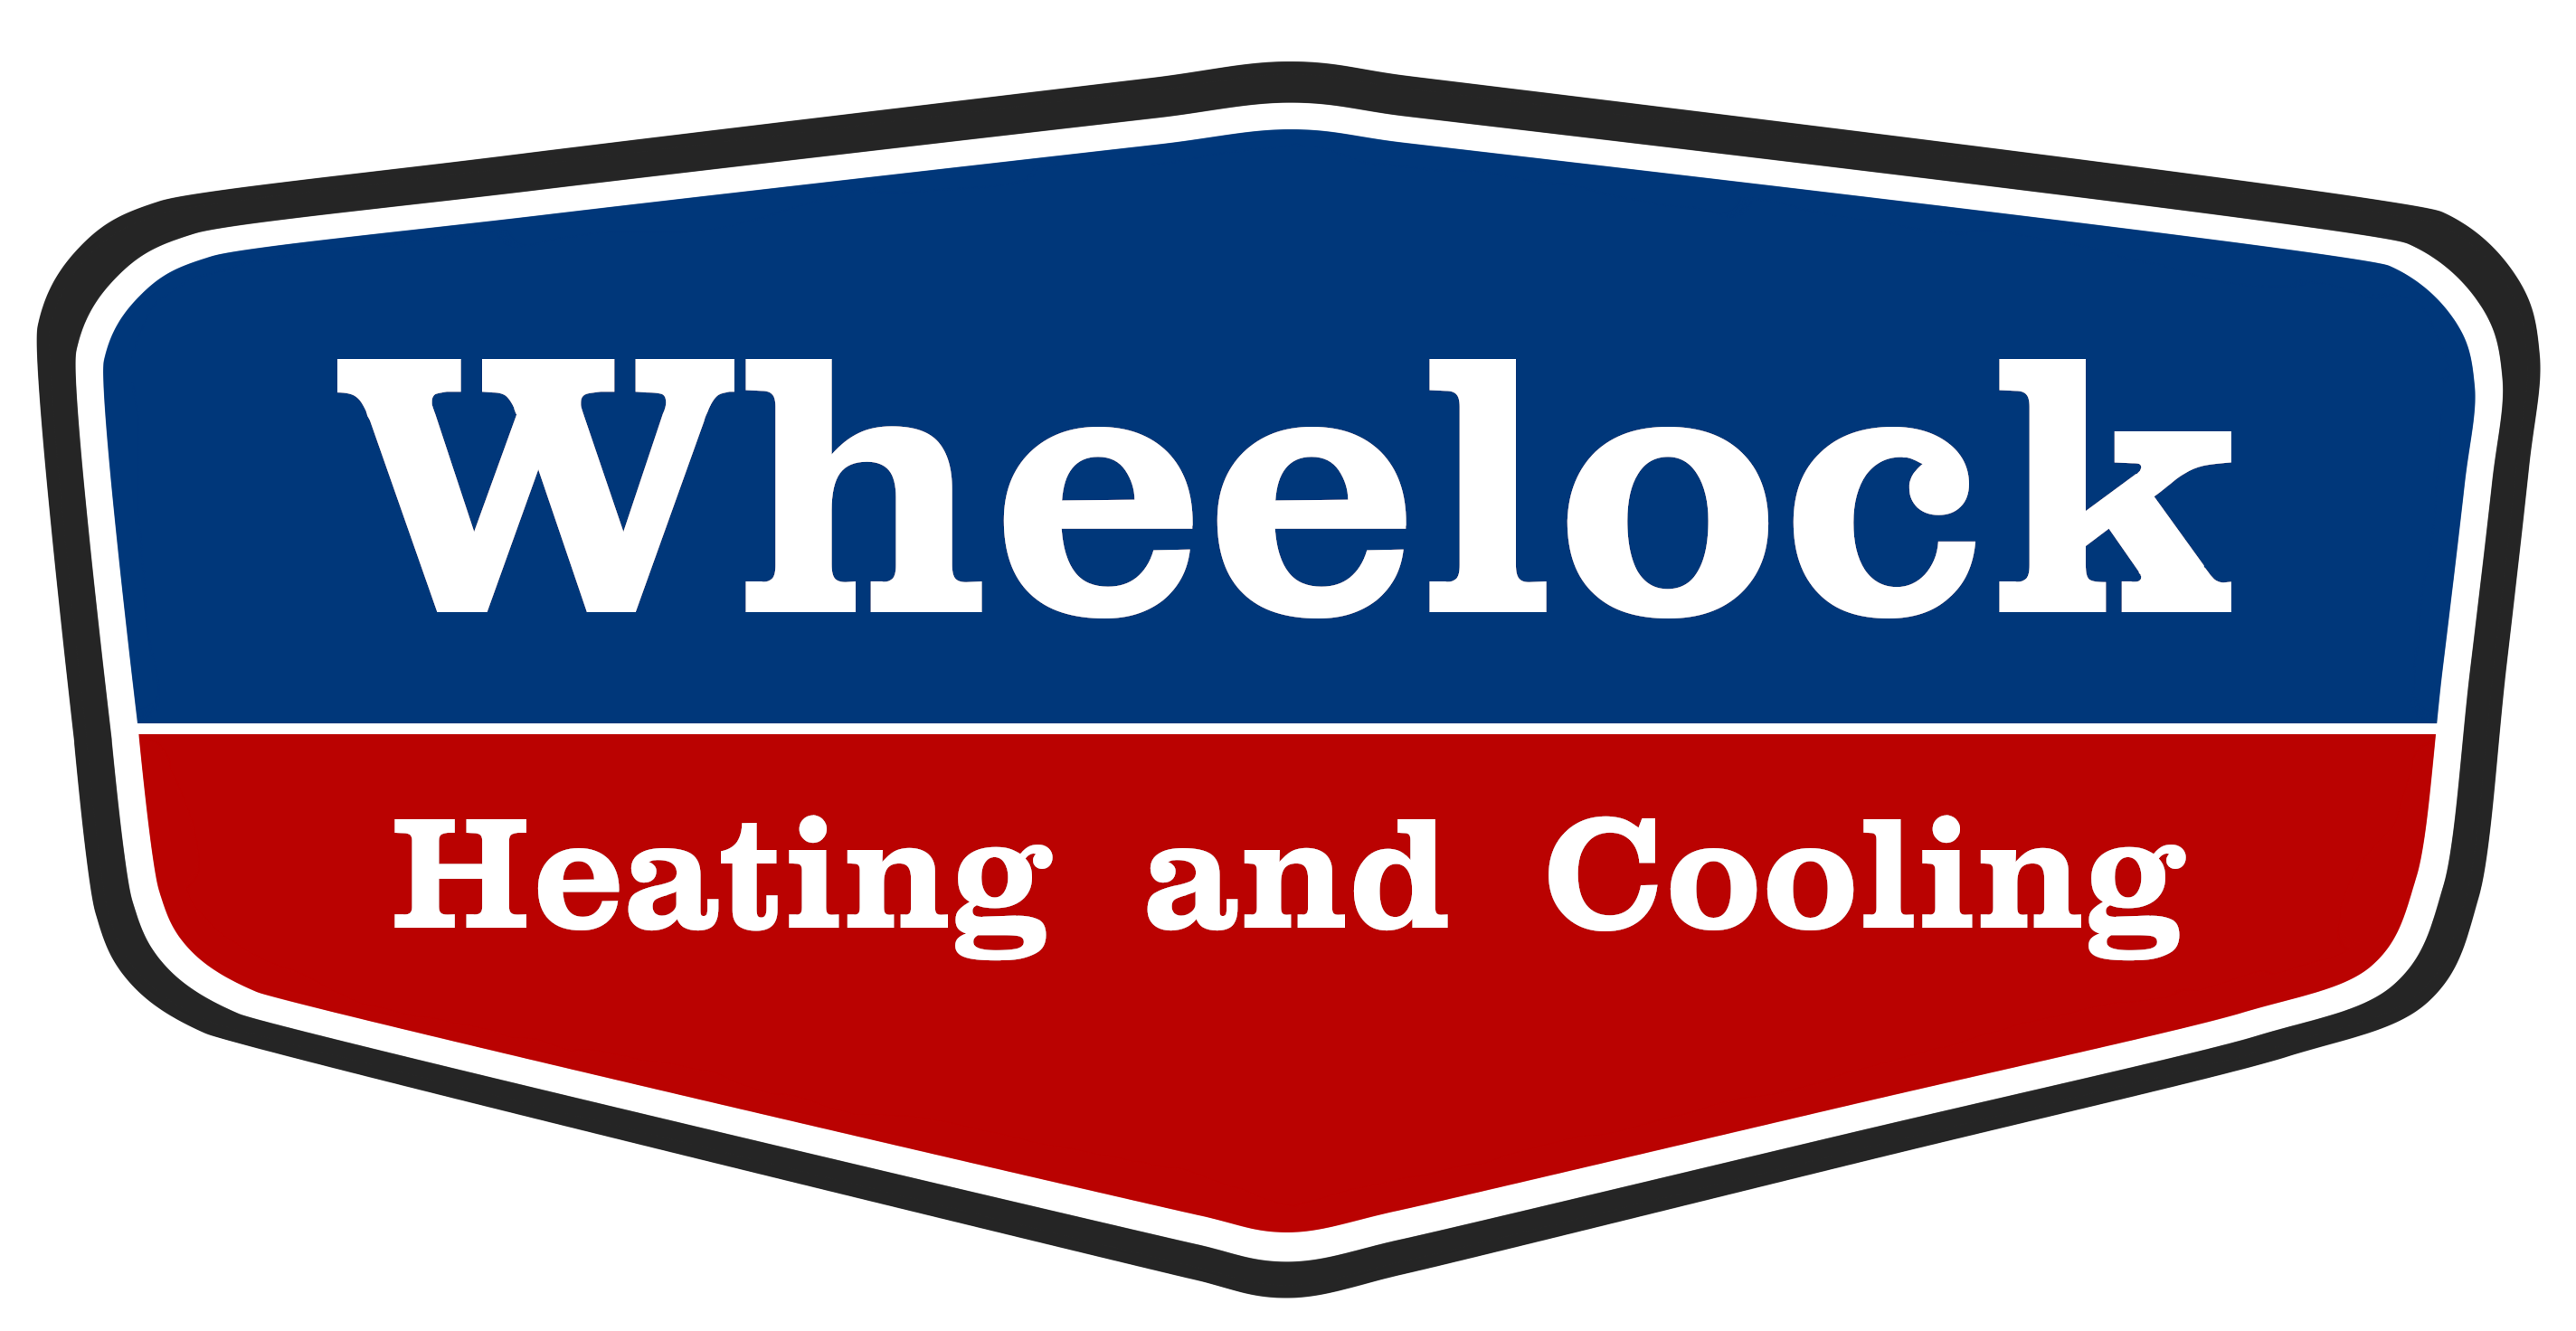 Wheelock Heating and Cooling LLC